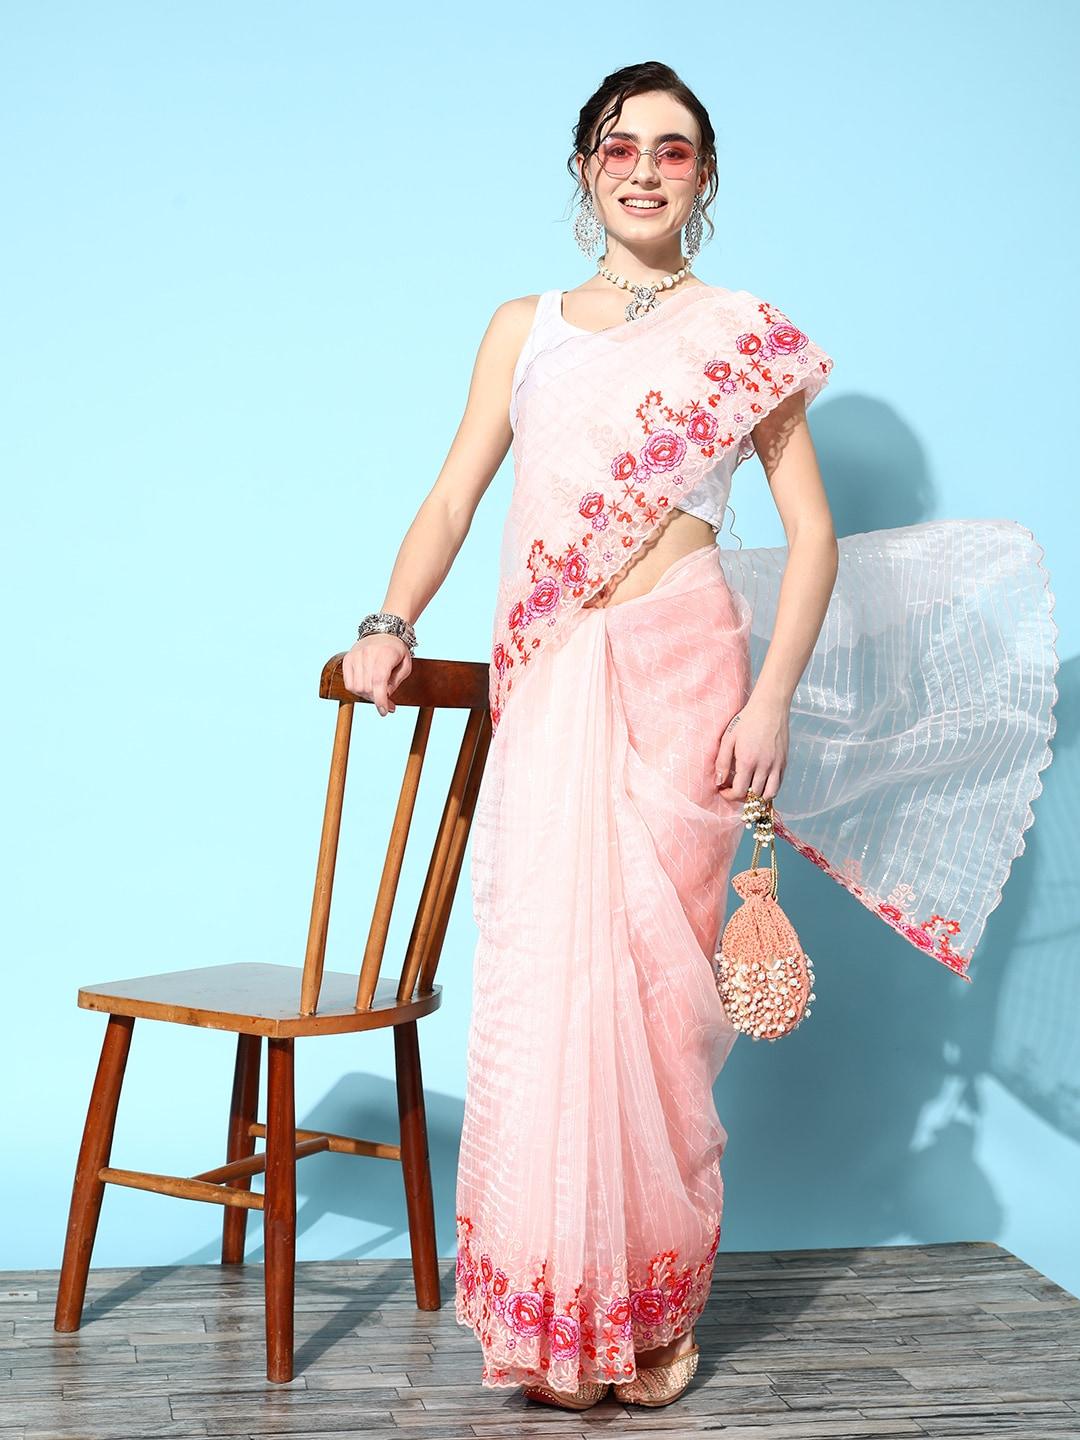 ishin-striped--saree-with-embroidered-border